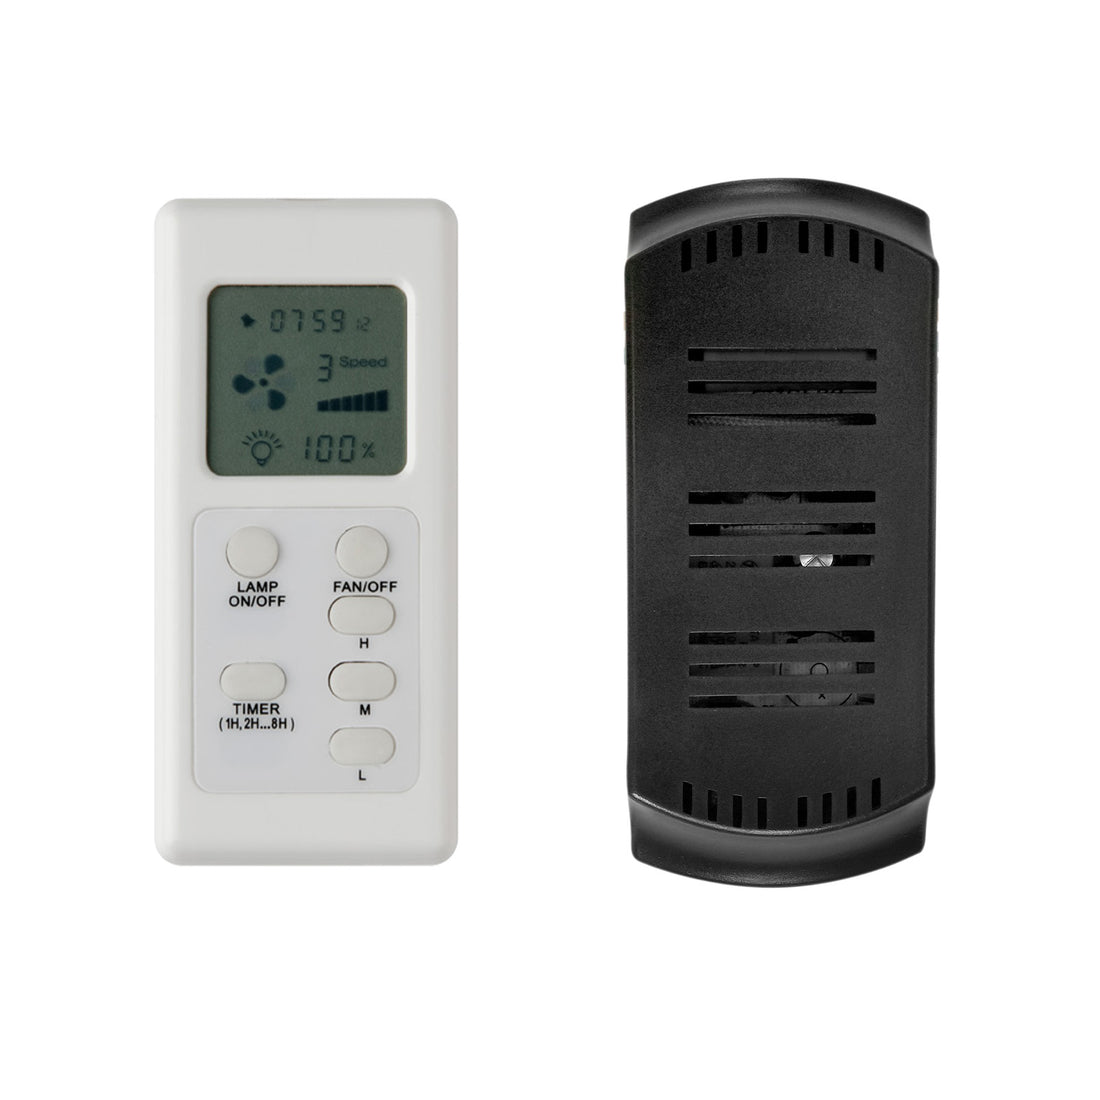 RF Remote Set with LCD Display for AC Ceiling Fans